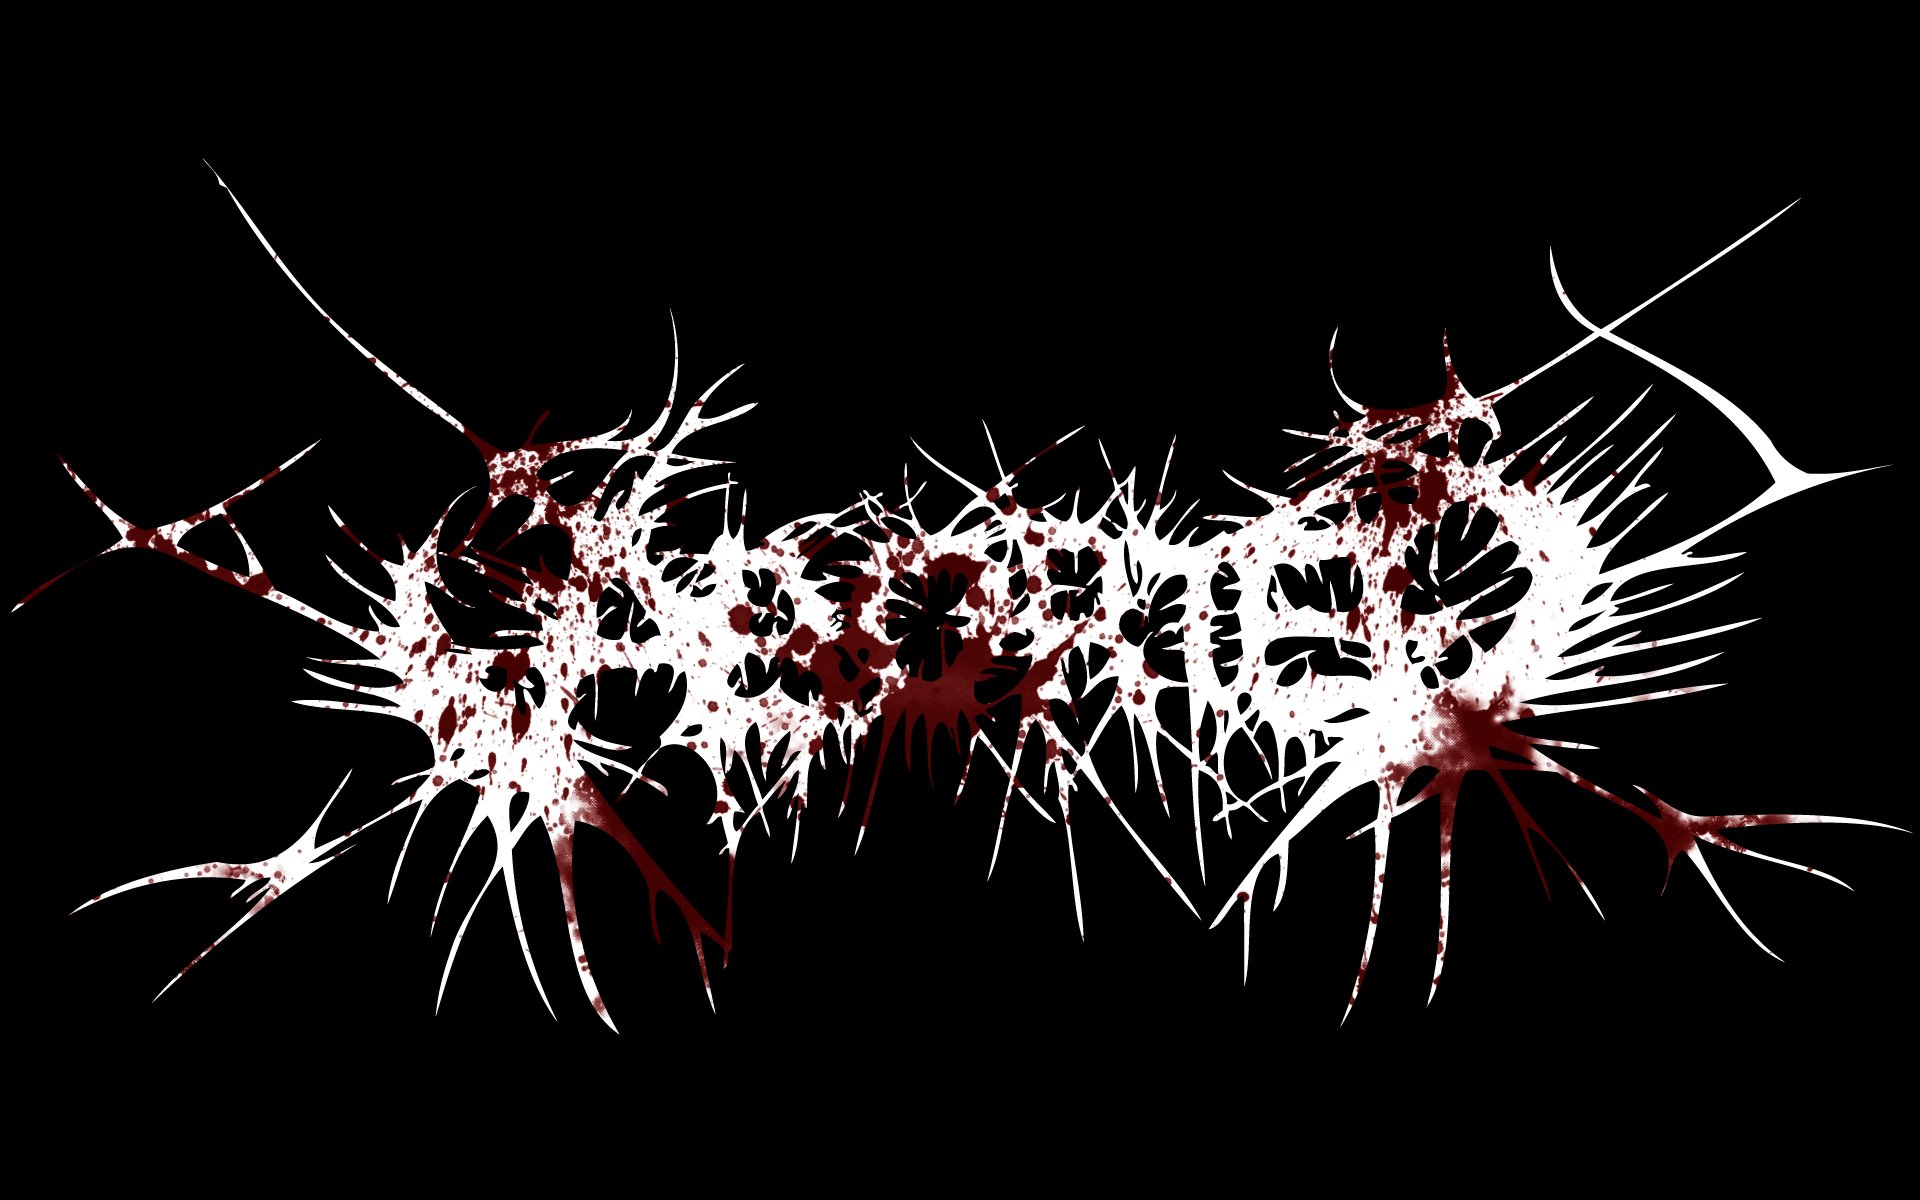 Aborted message. Aborted Band.